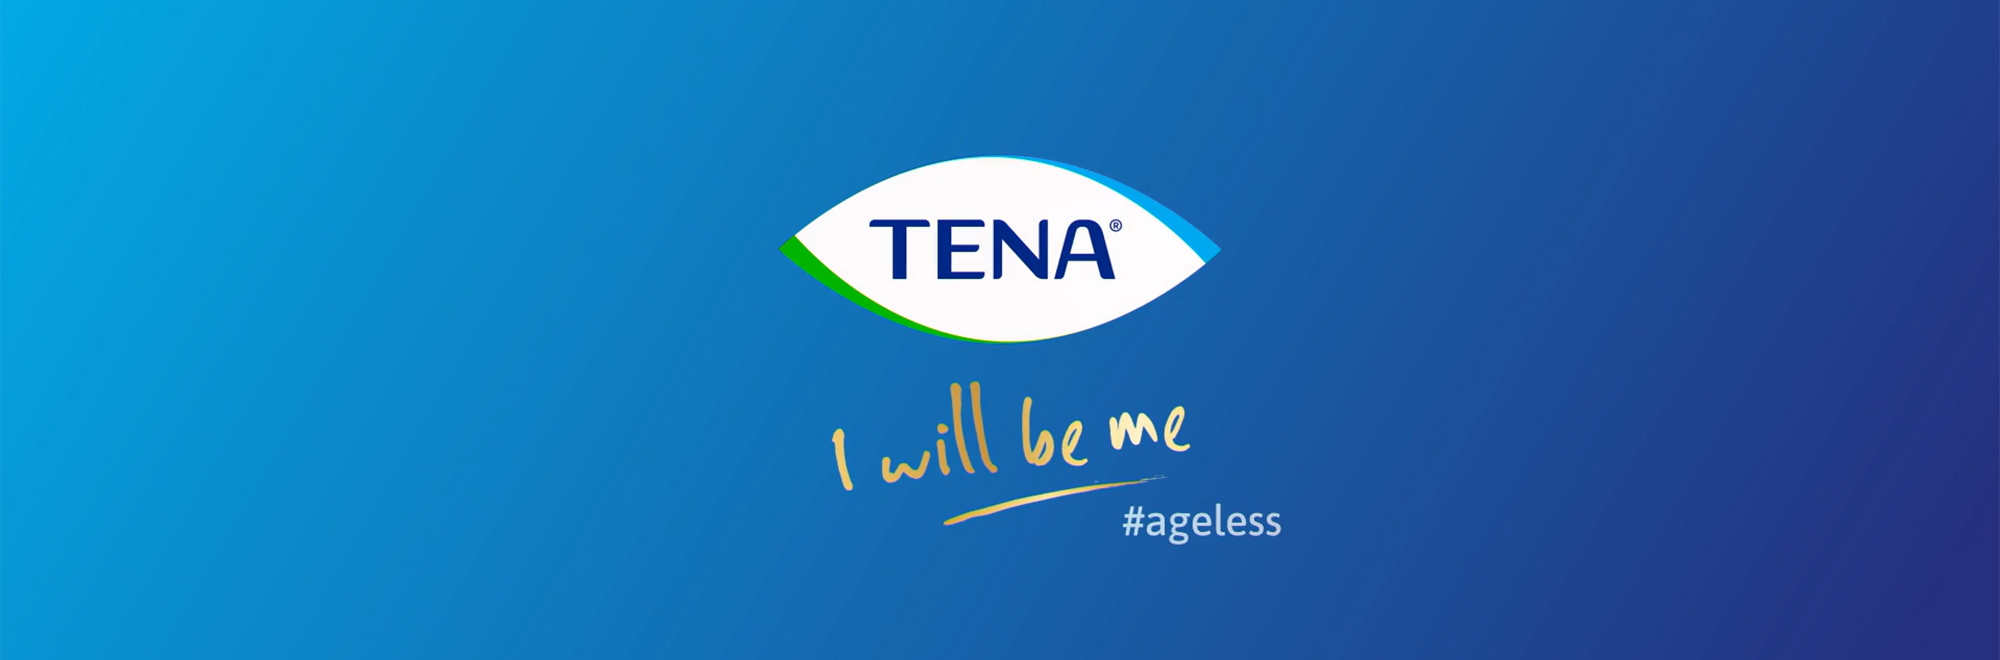 TENA’s new #Ageless campaign by AMV BBDO talks sex to challenge perceptions of ageing and incontinence